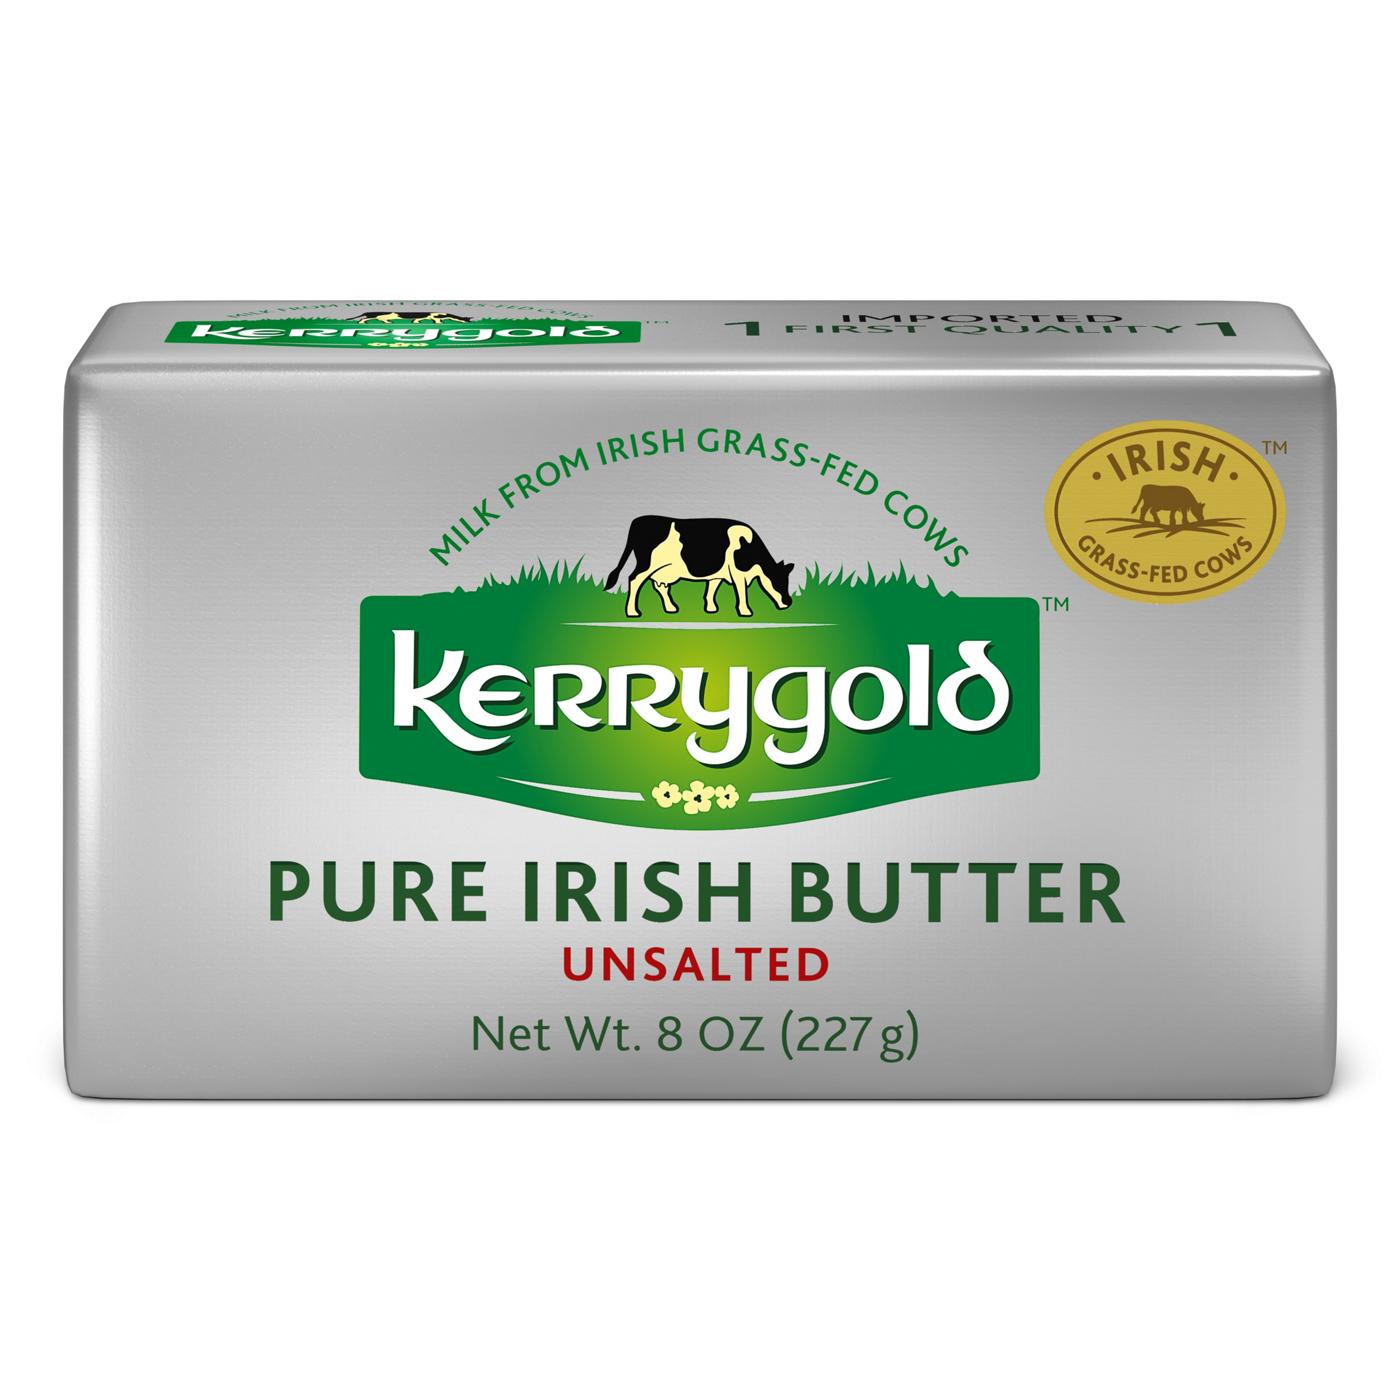 Kerrygold Grass-Fed Unsalted Pure Irish Butter; image 1 of 3